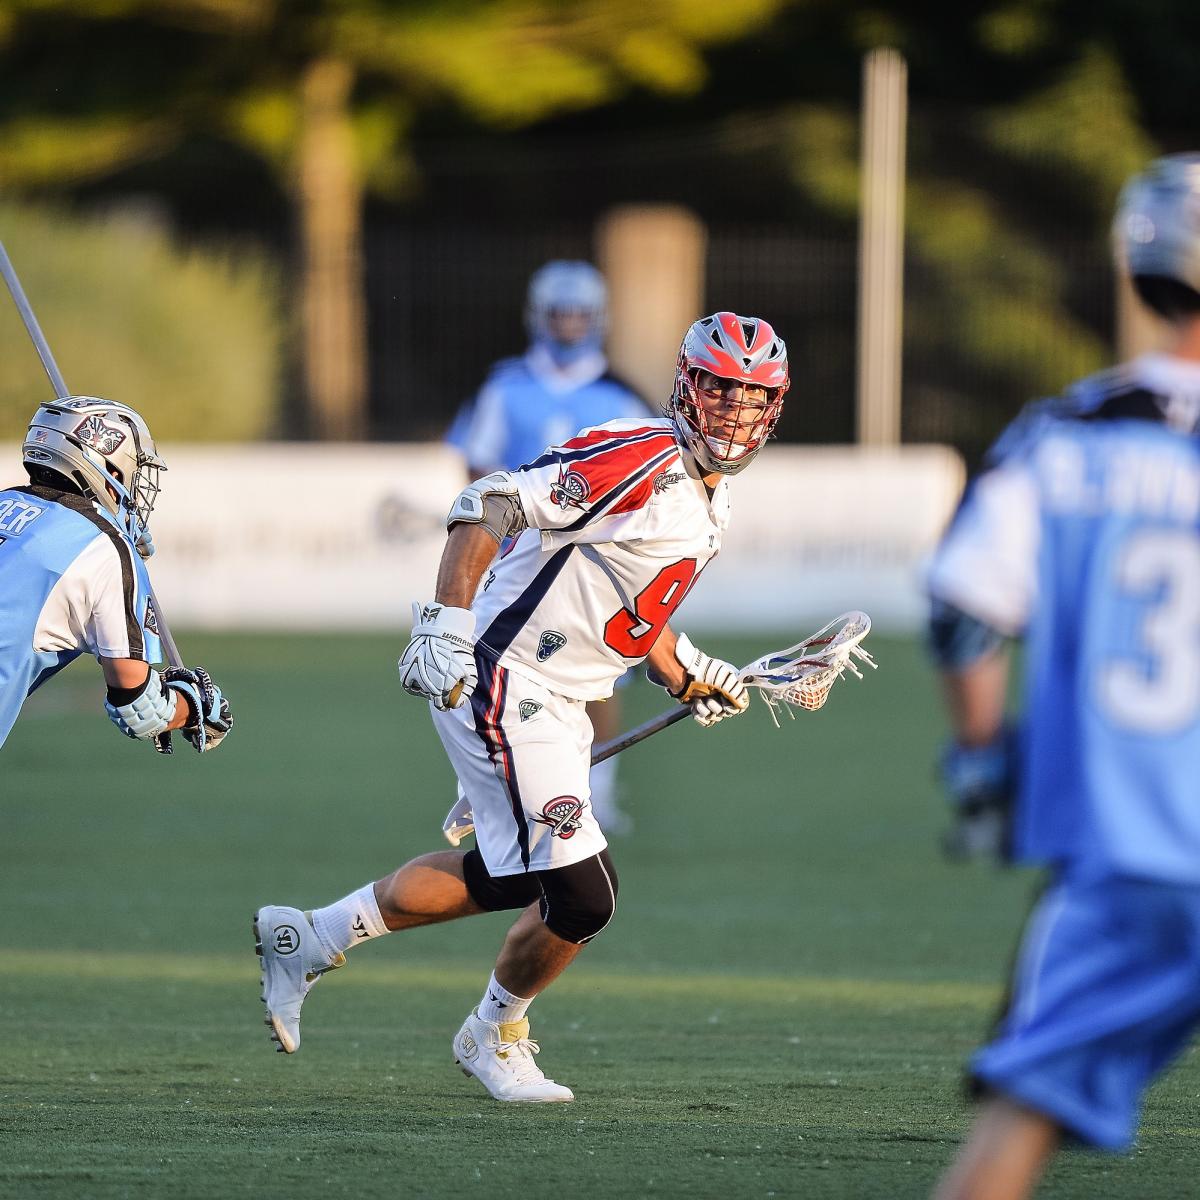 MLL All-Star Game 2014: Date, Start Time, Rosters and More | Bleacher Report | Latest ...